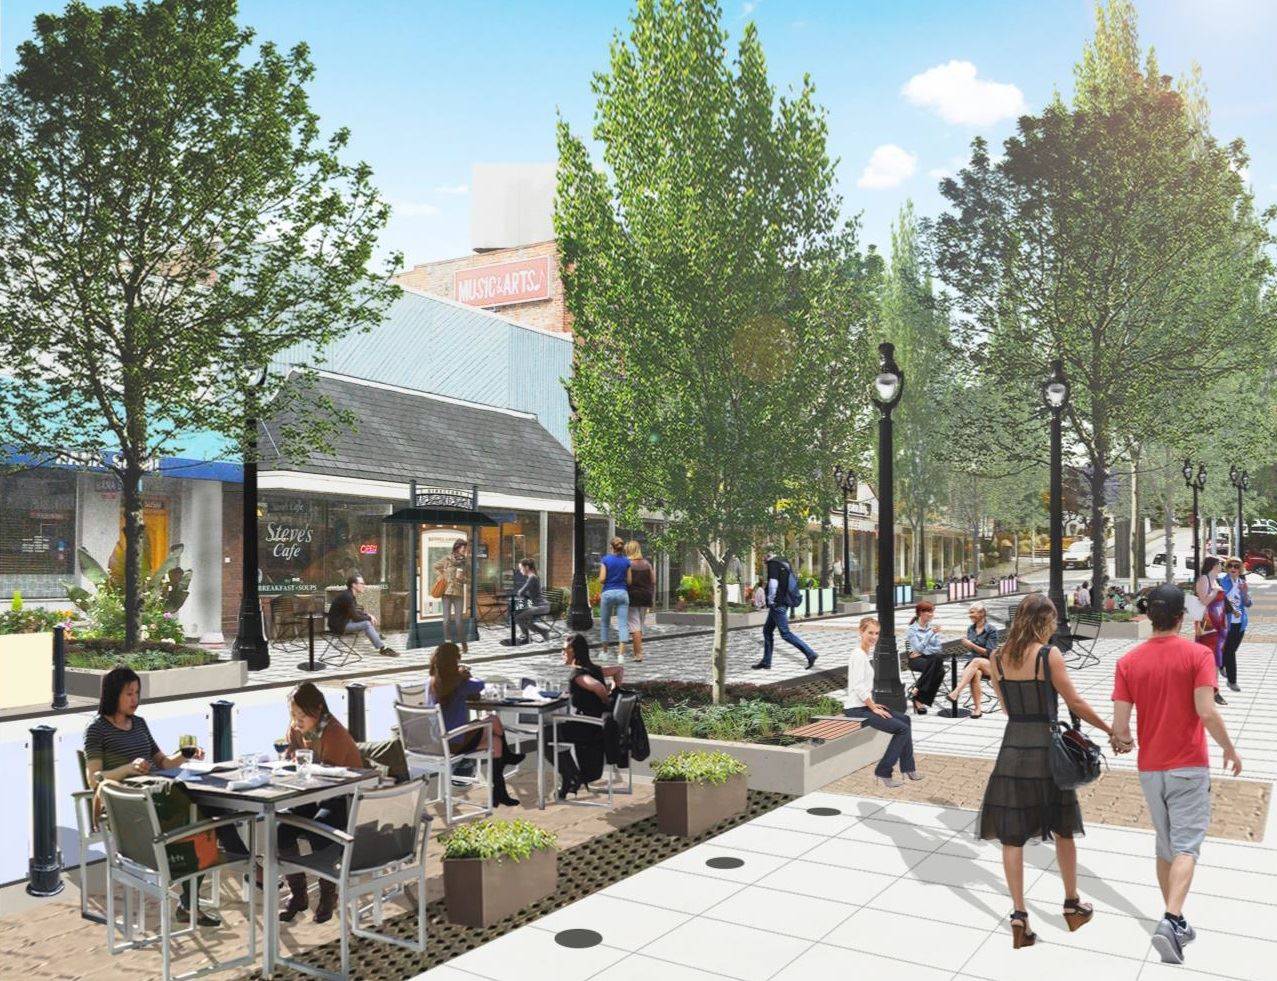 An artist’s rendering shows what Main Street will look like once the enhancements are complete. Courtesy of the City of Bothell